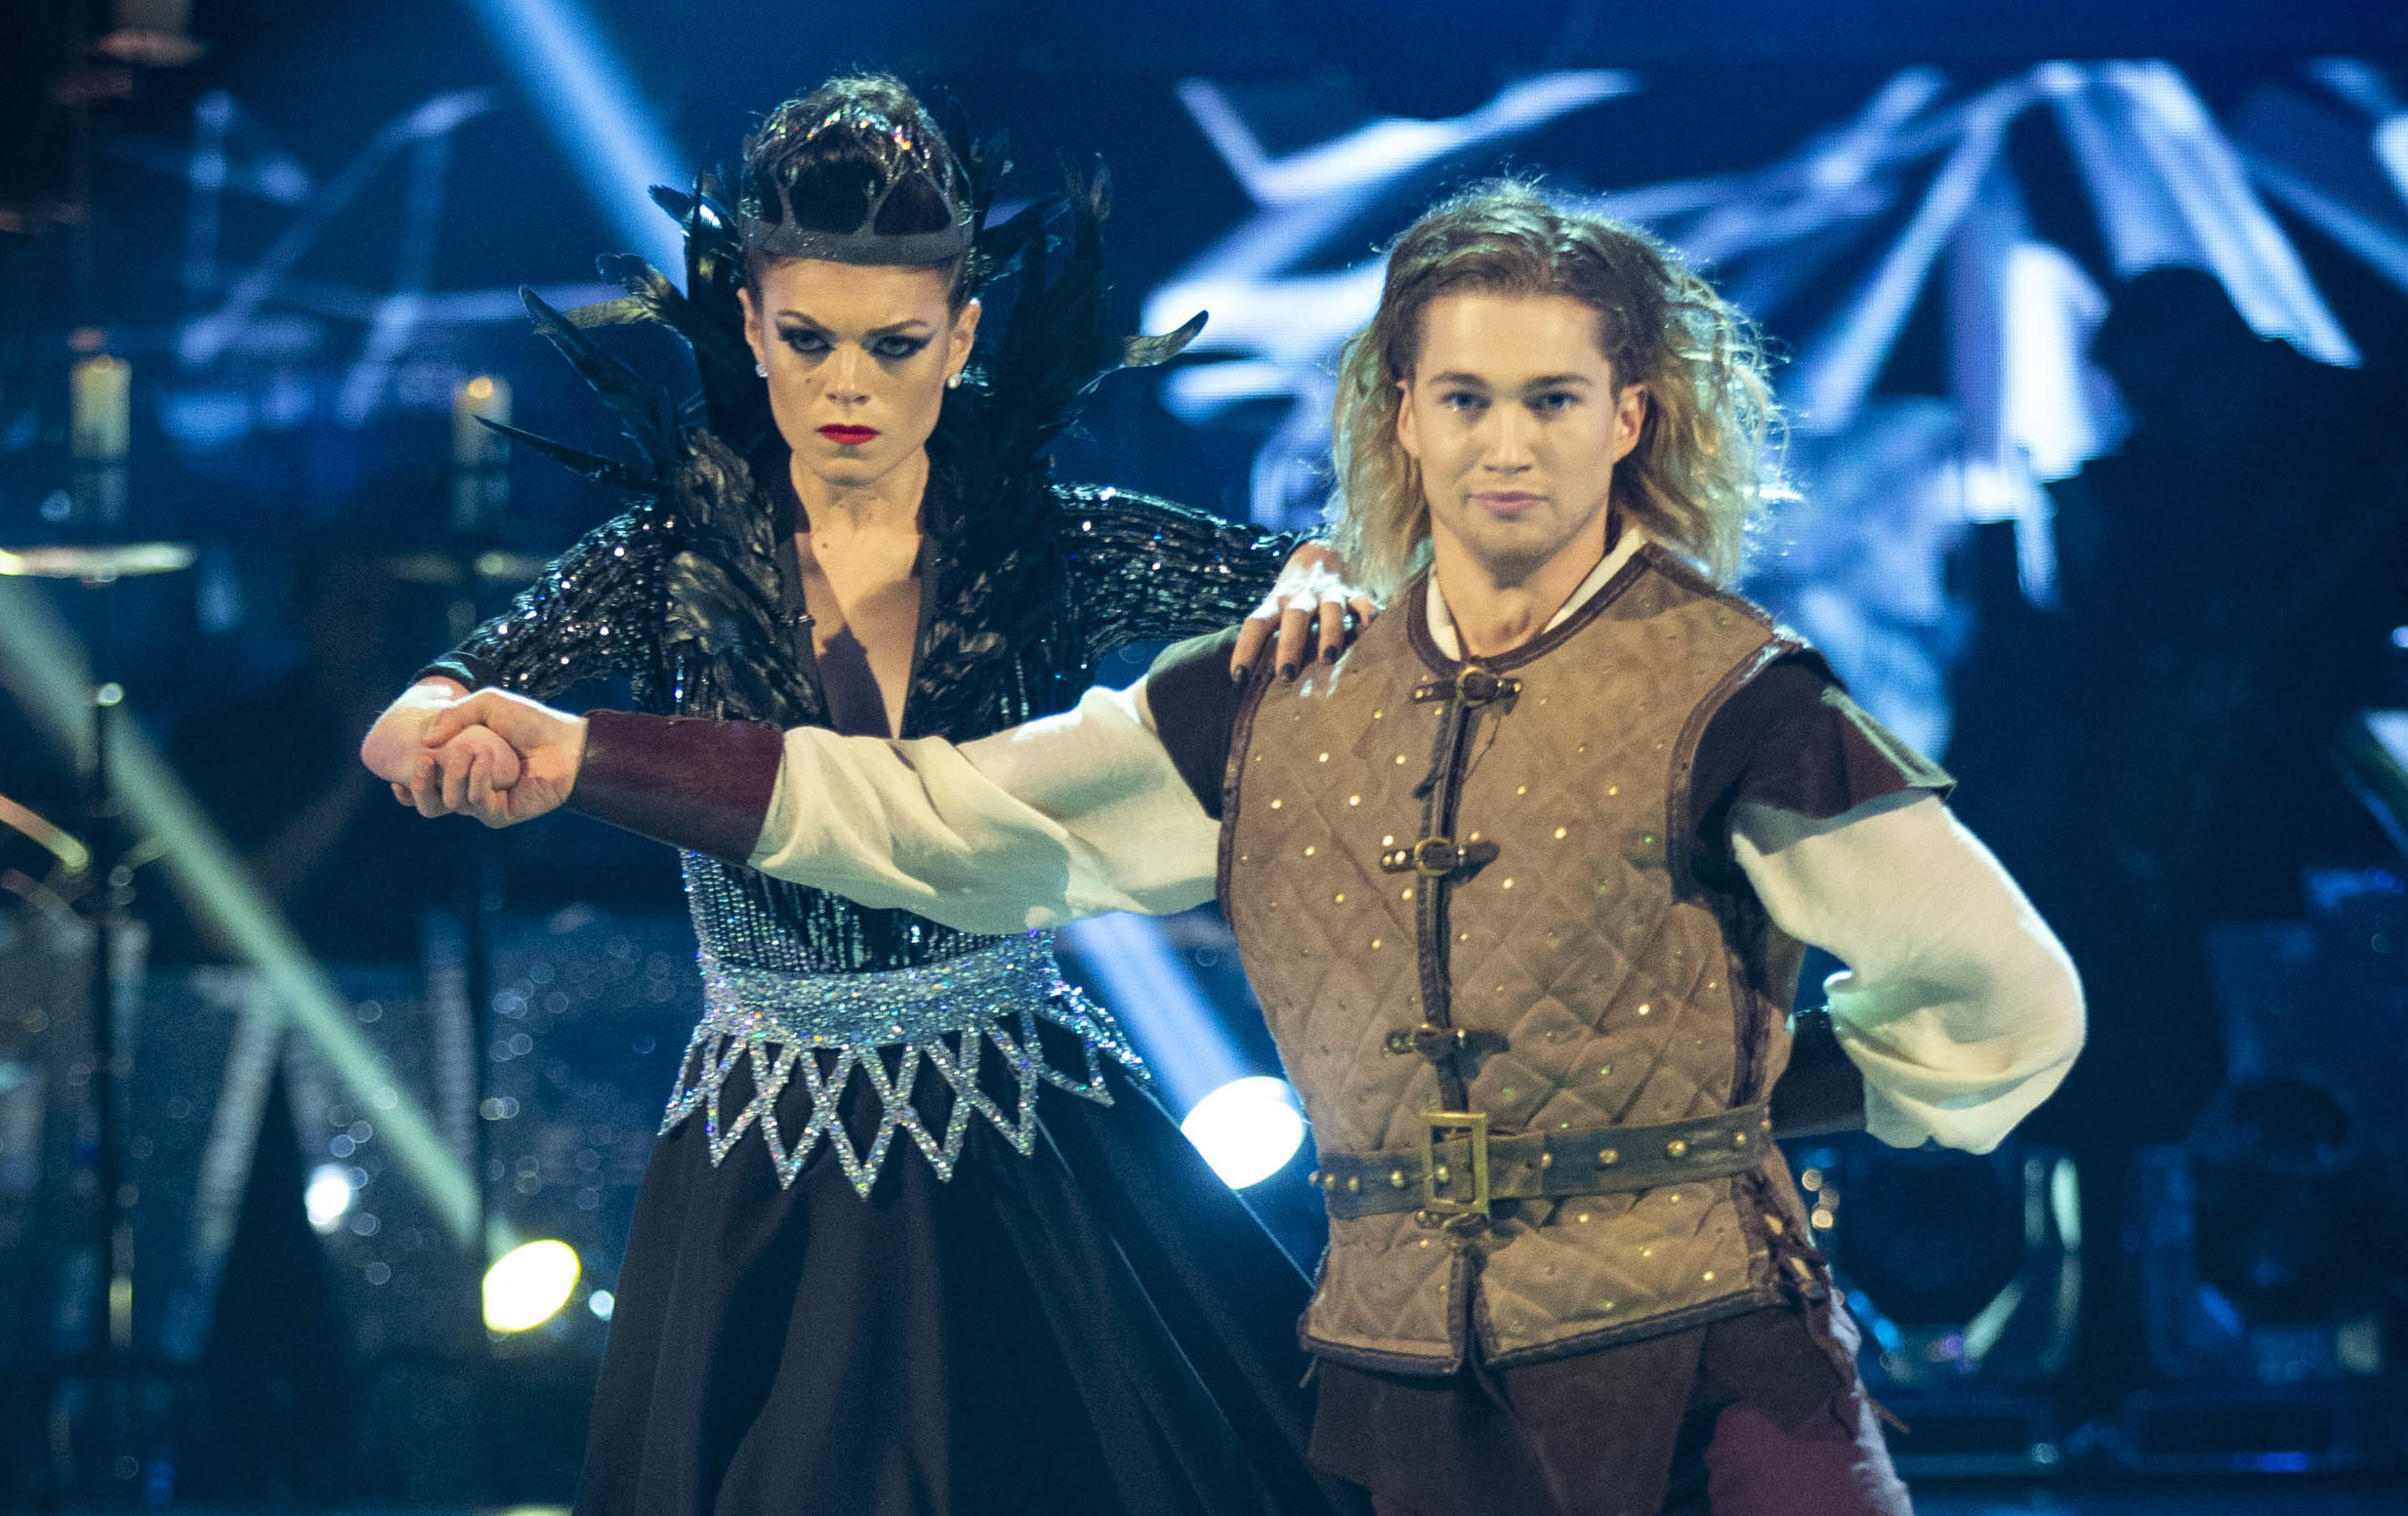 Lauren Steadman and AJ Pritchard take to the floor (Guy Levy / BBC)